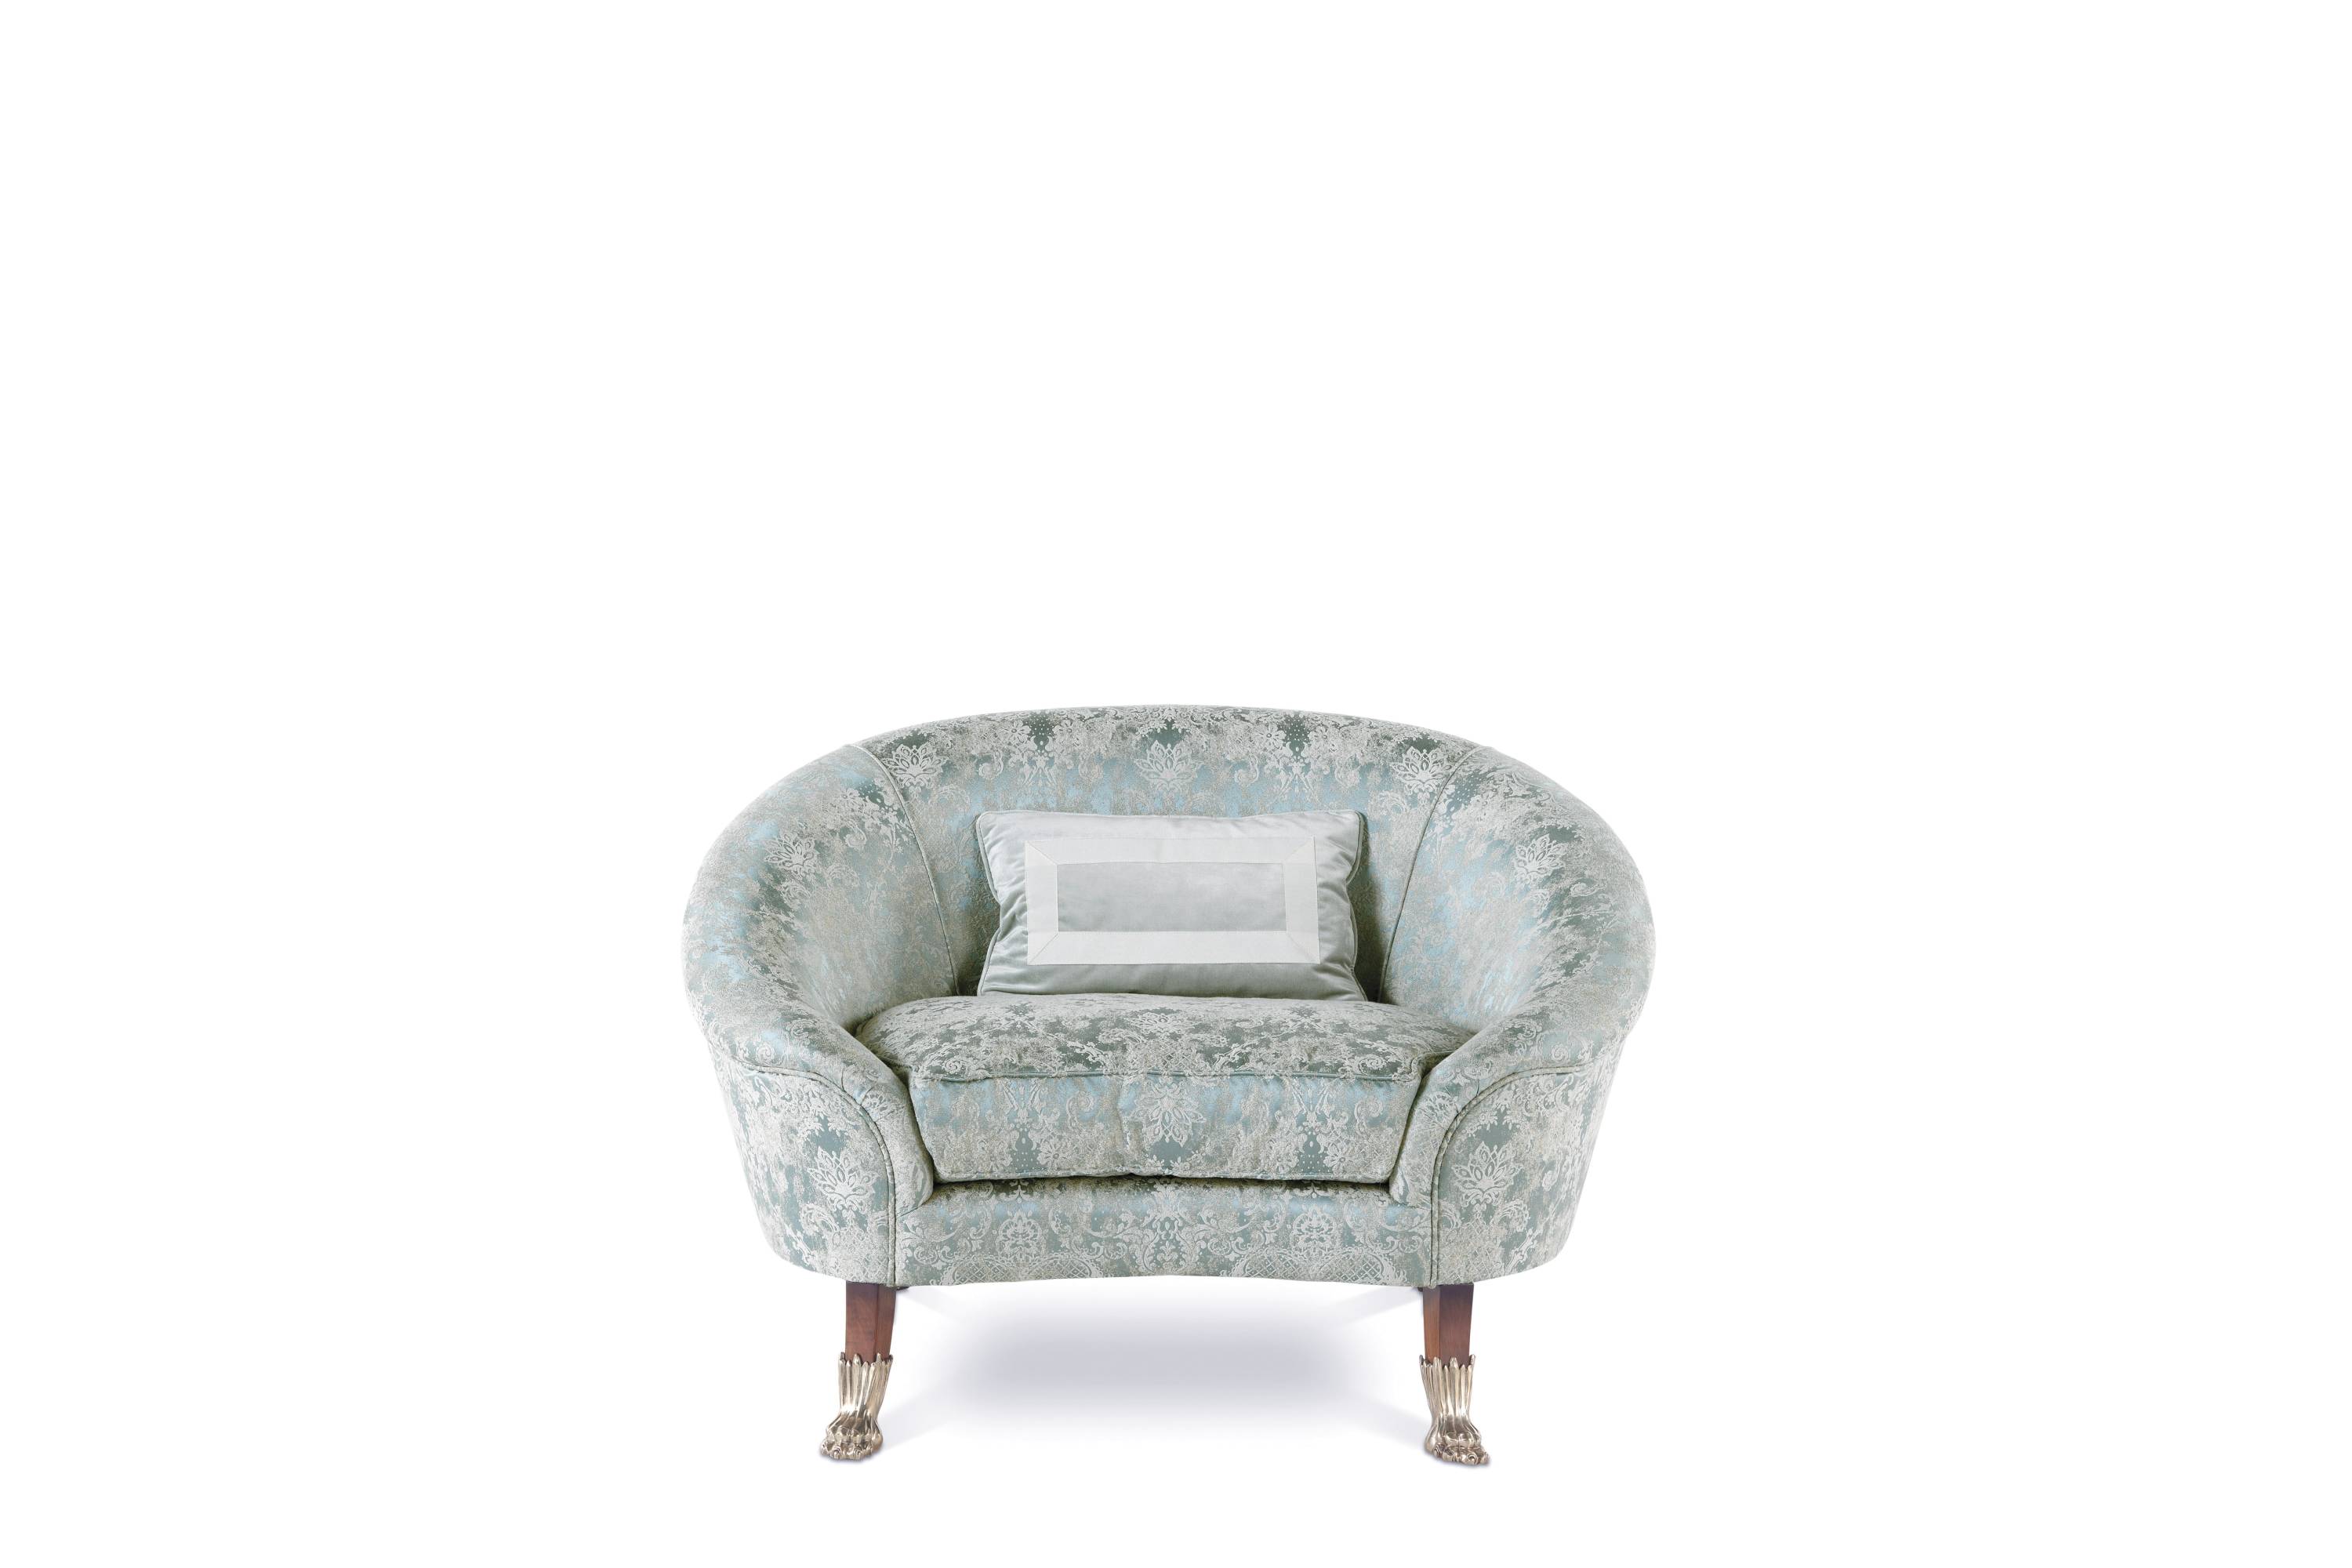 HARMONIA armchair - convey elegance to each space with Italian classic armchairs of the classic Savoir-Faire collection